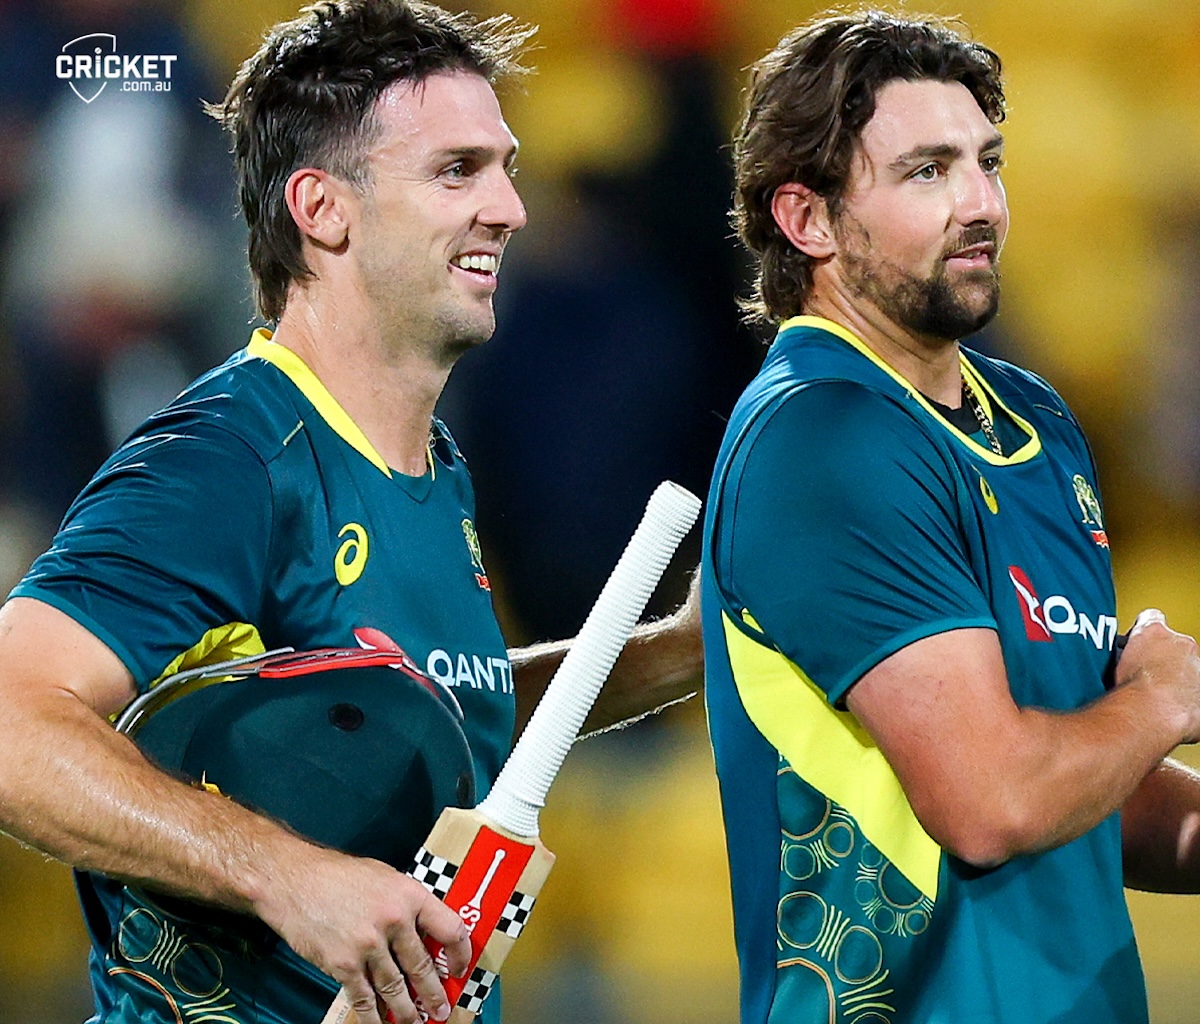 Australia will hope captain Mitch Marsh and the big hitting Tim David deliver with the bat